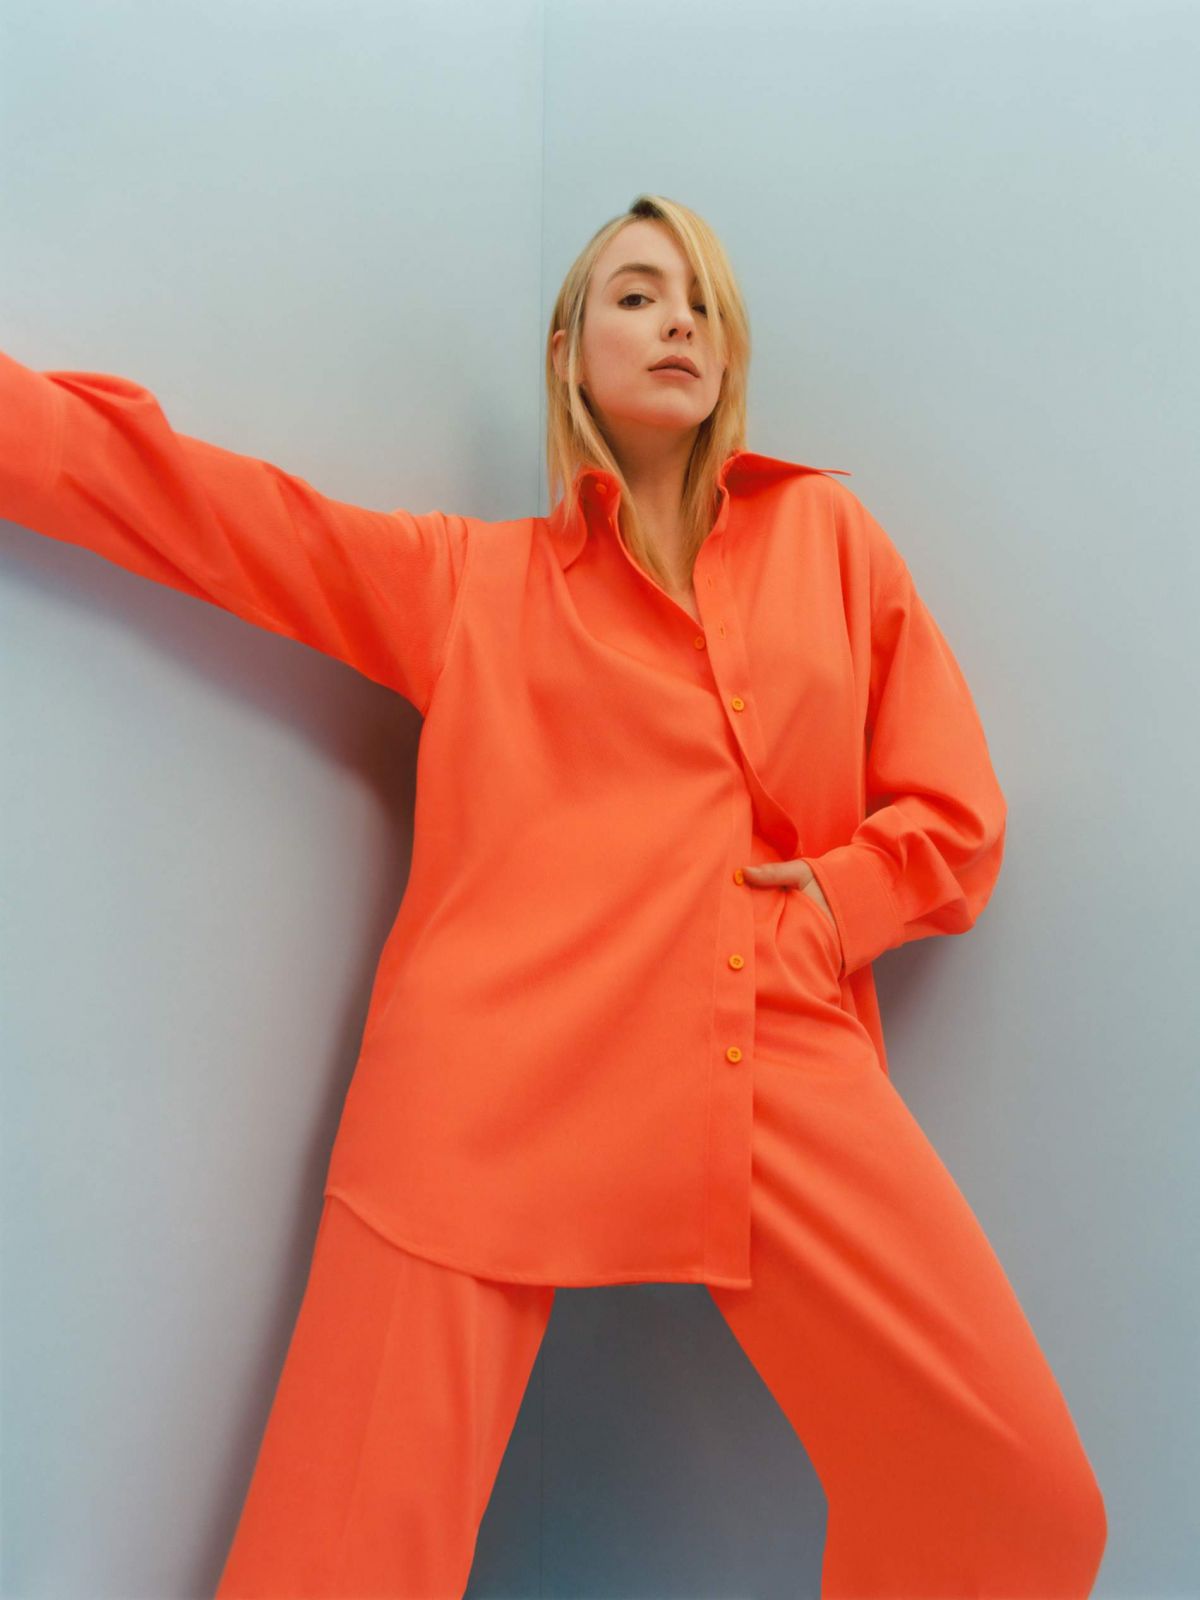 jodie-comer-for-net-a-porter-march-2022-5.jpg